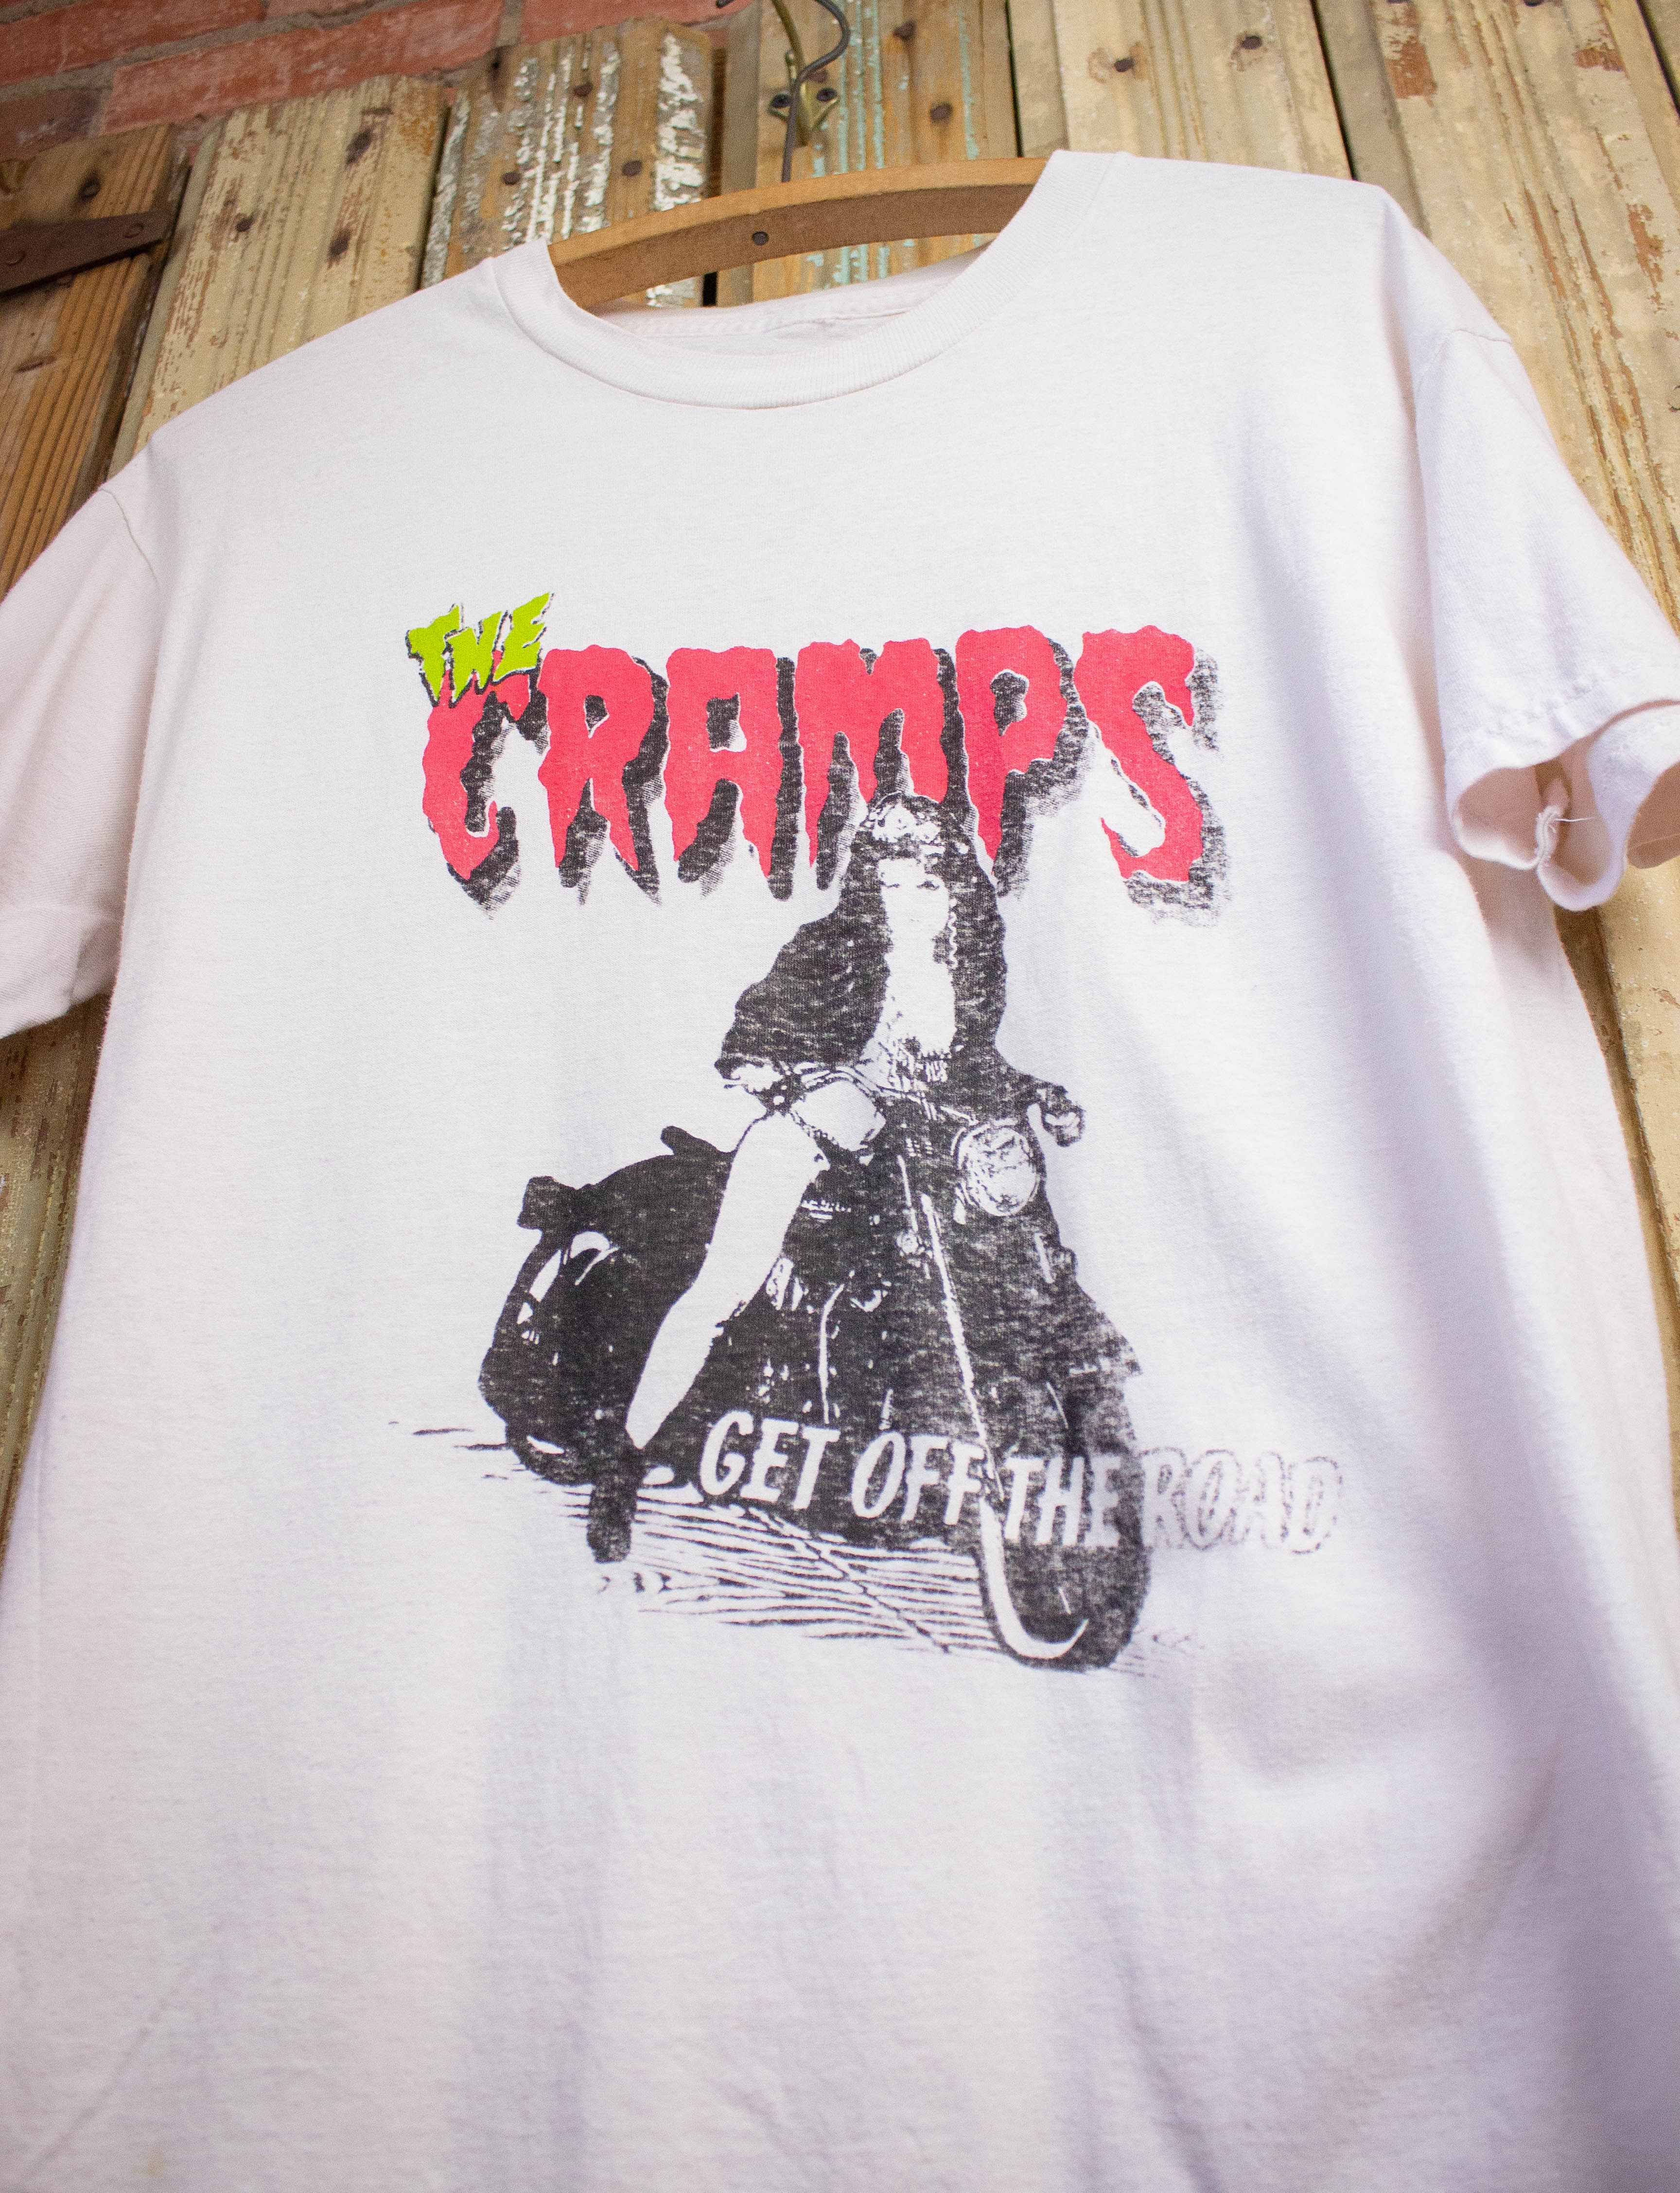 90s 1997 THE CRAMPS クランプス vintage tシャツ - トップス